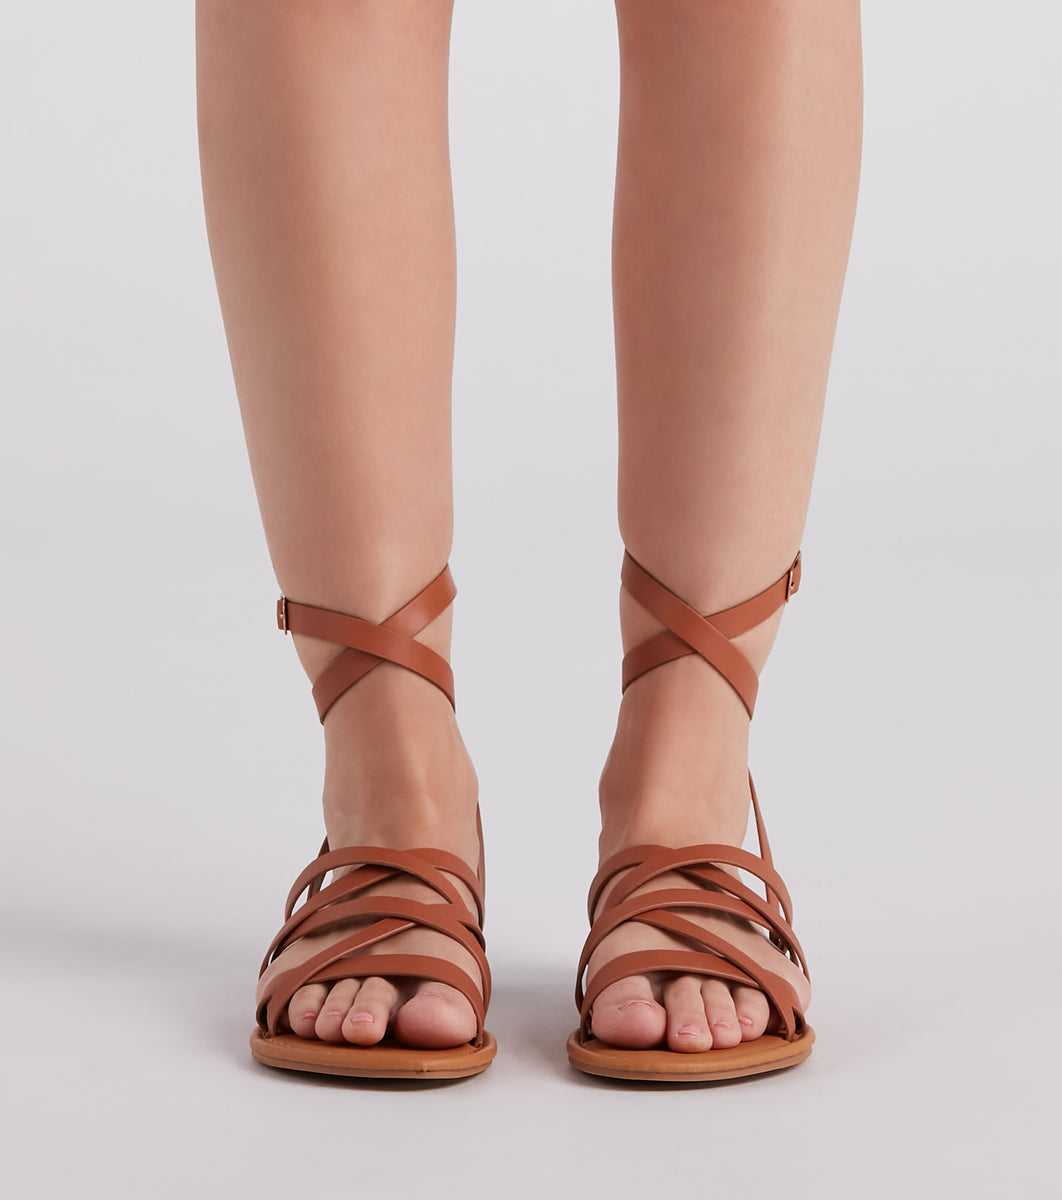 Bohemian Chic Strappy Sandals